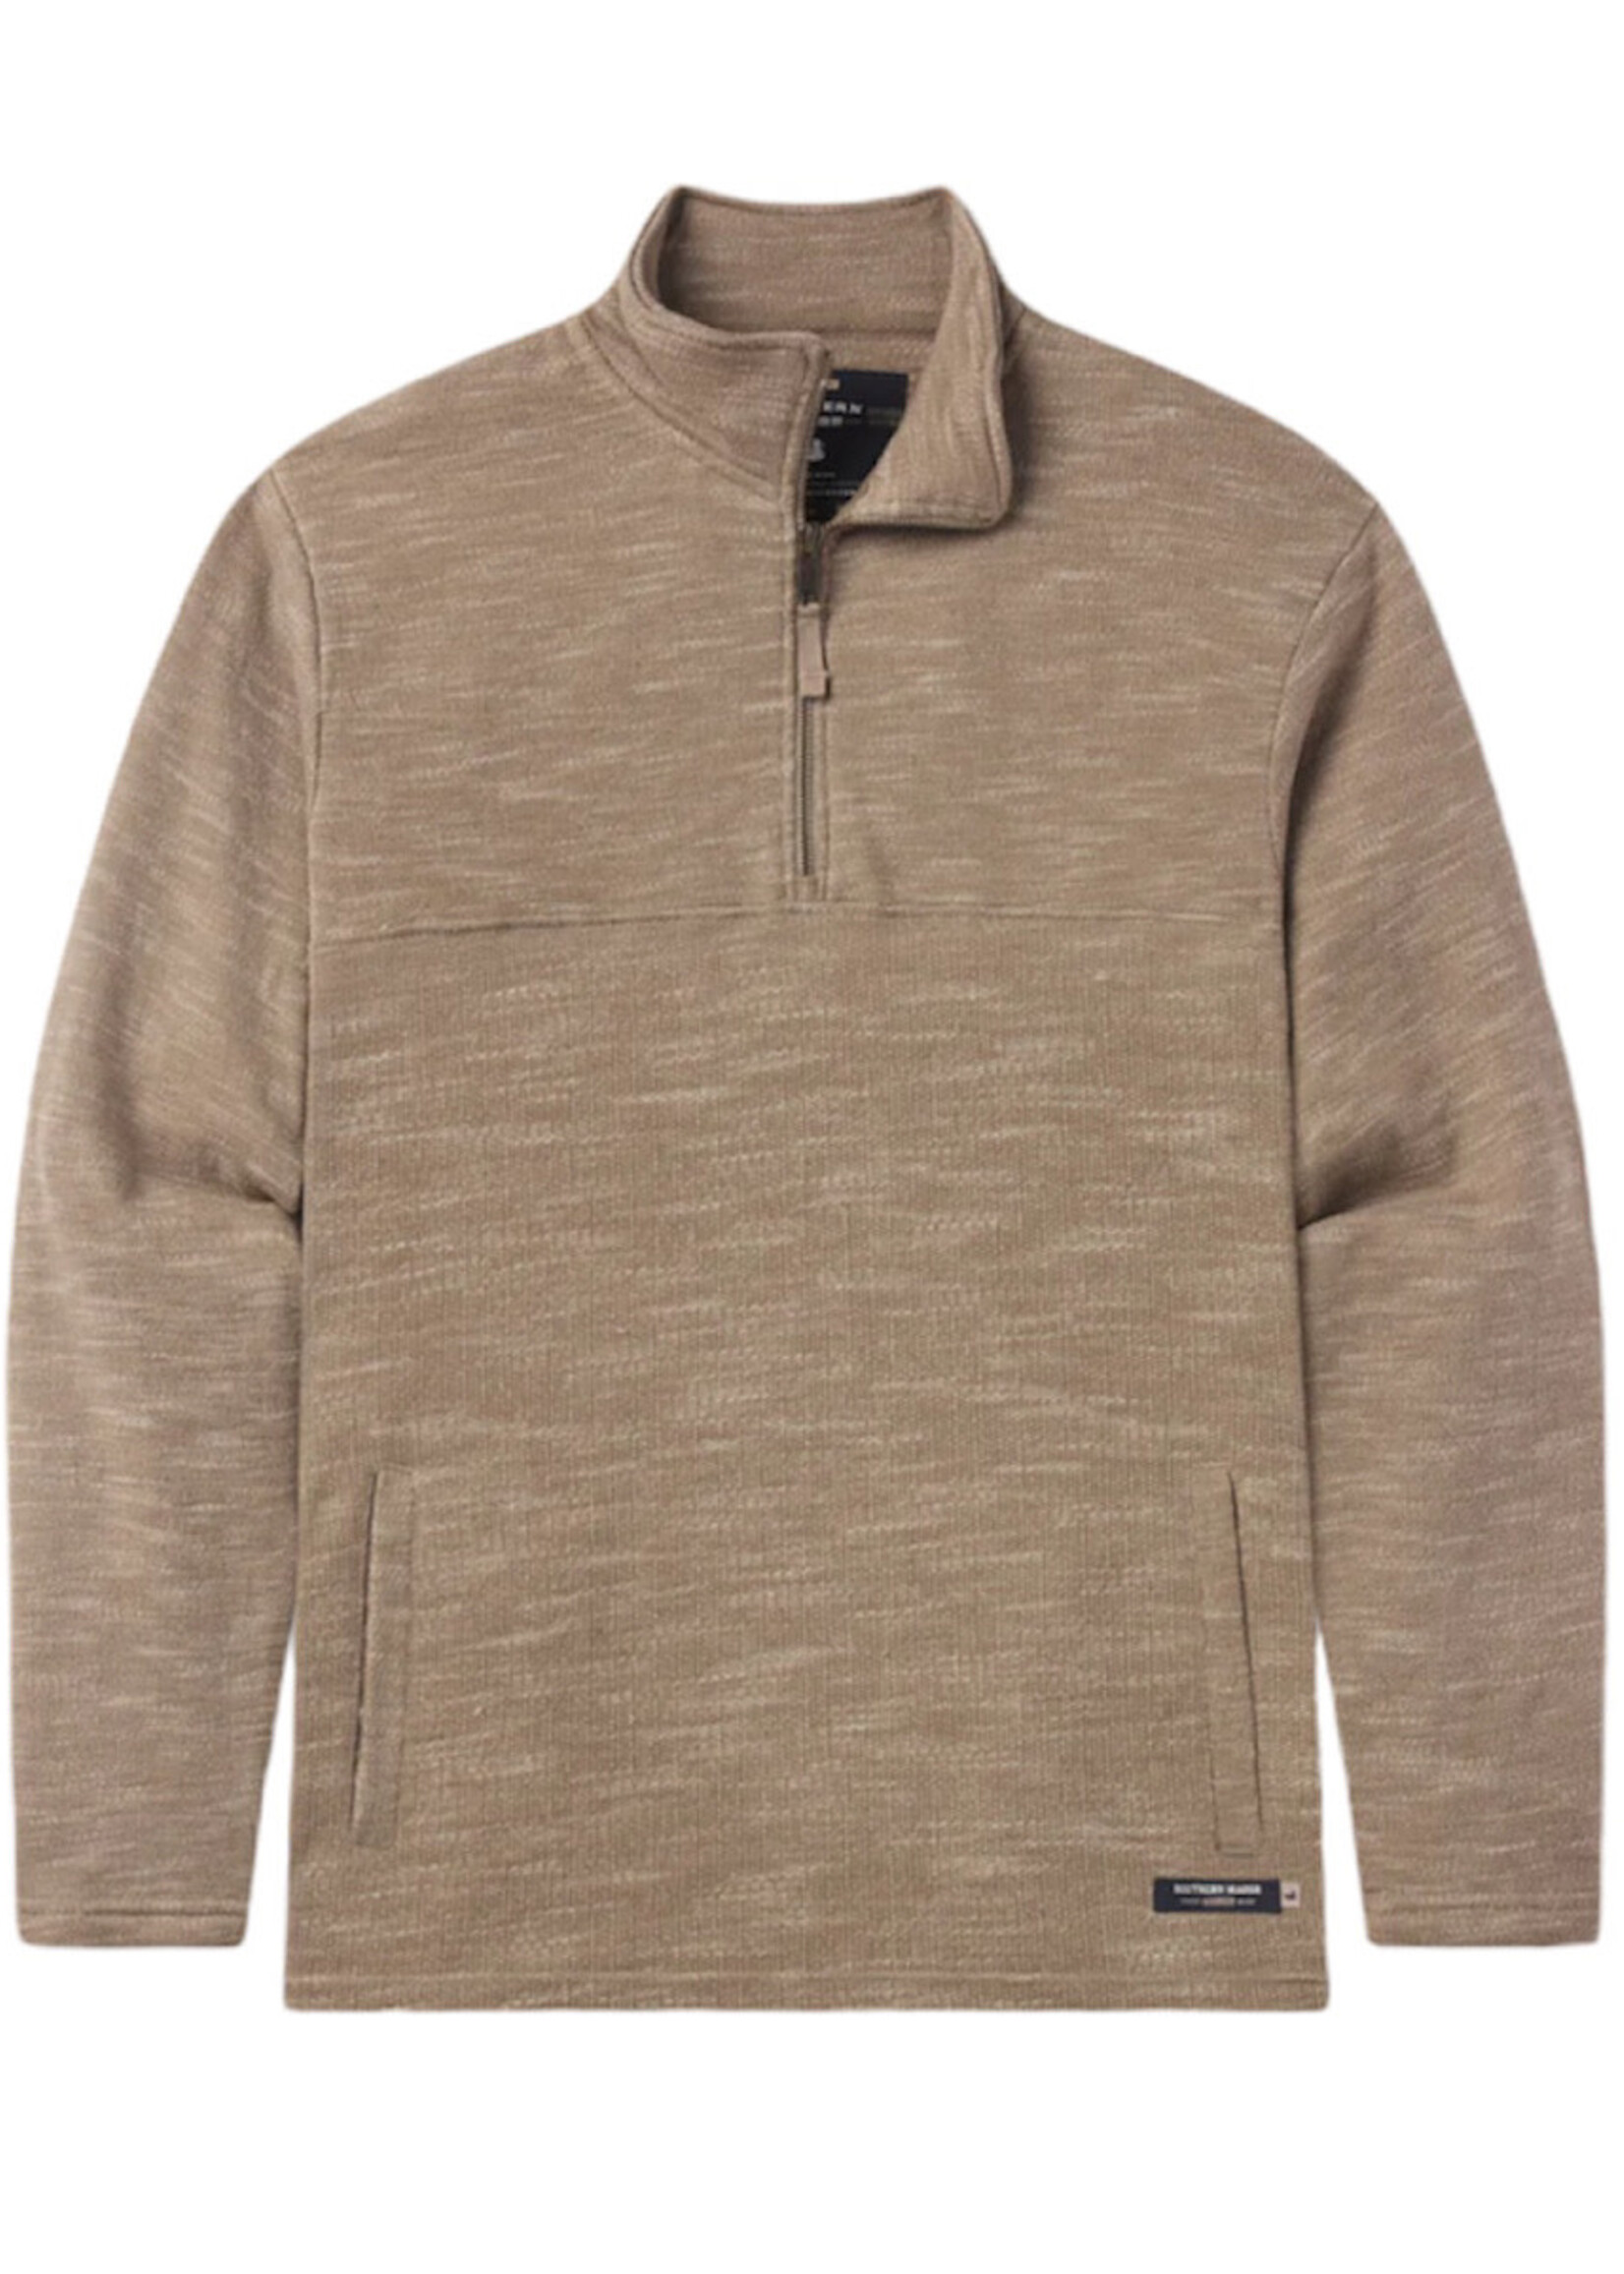 Southern Marsh Southern Marsh Midland Trail Pullover Burnt Taupe